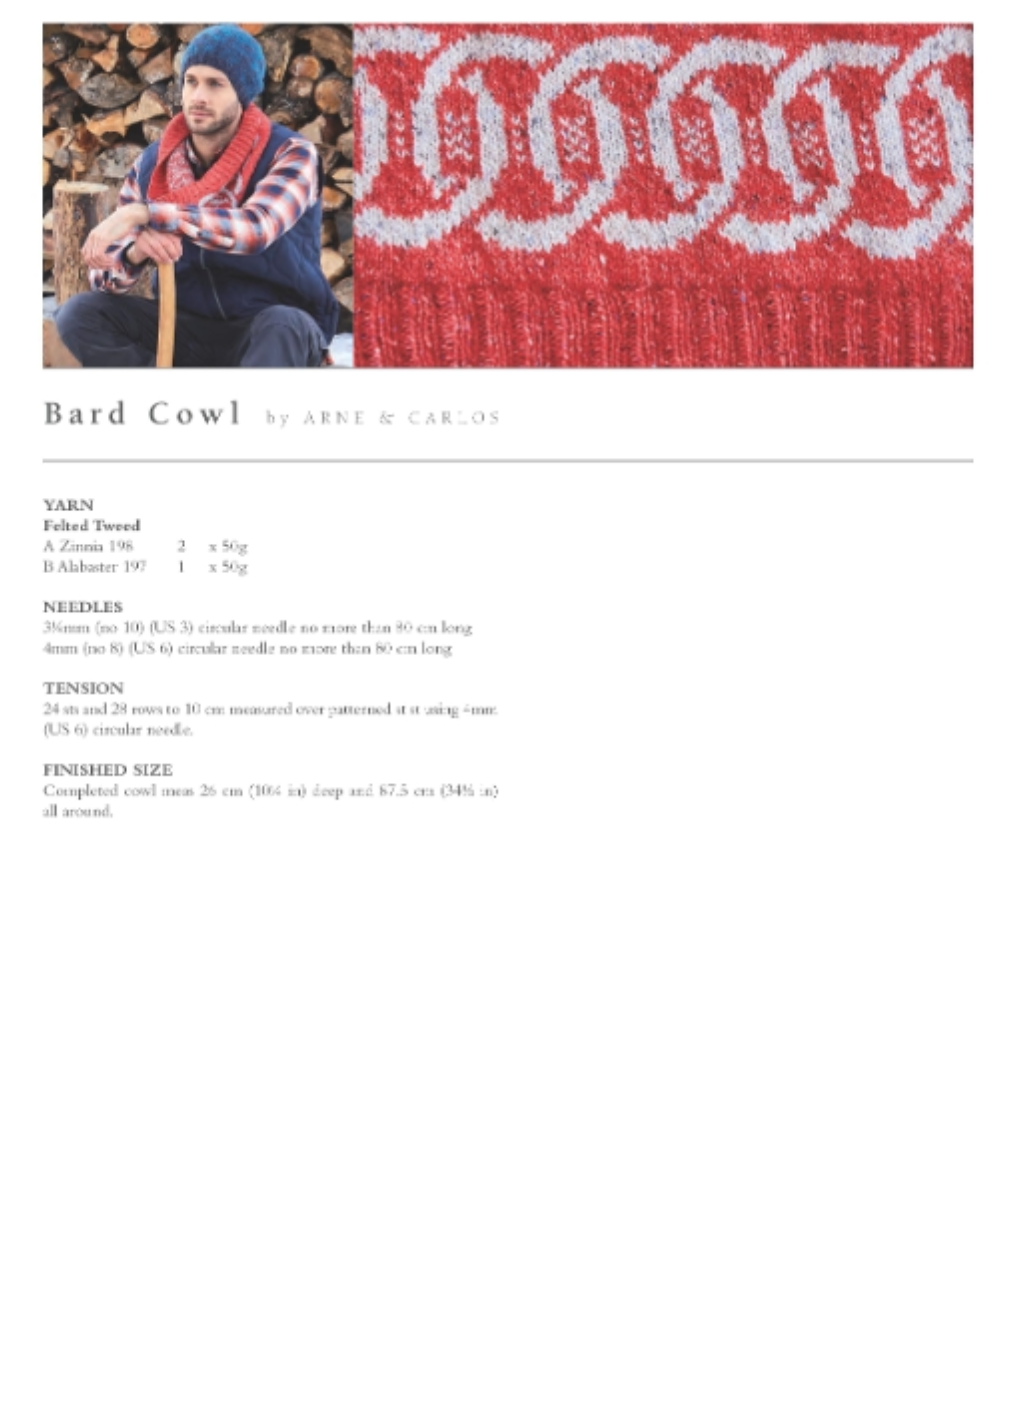 Bard cowl. A red and white patterned cowl (snood).